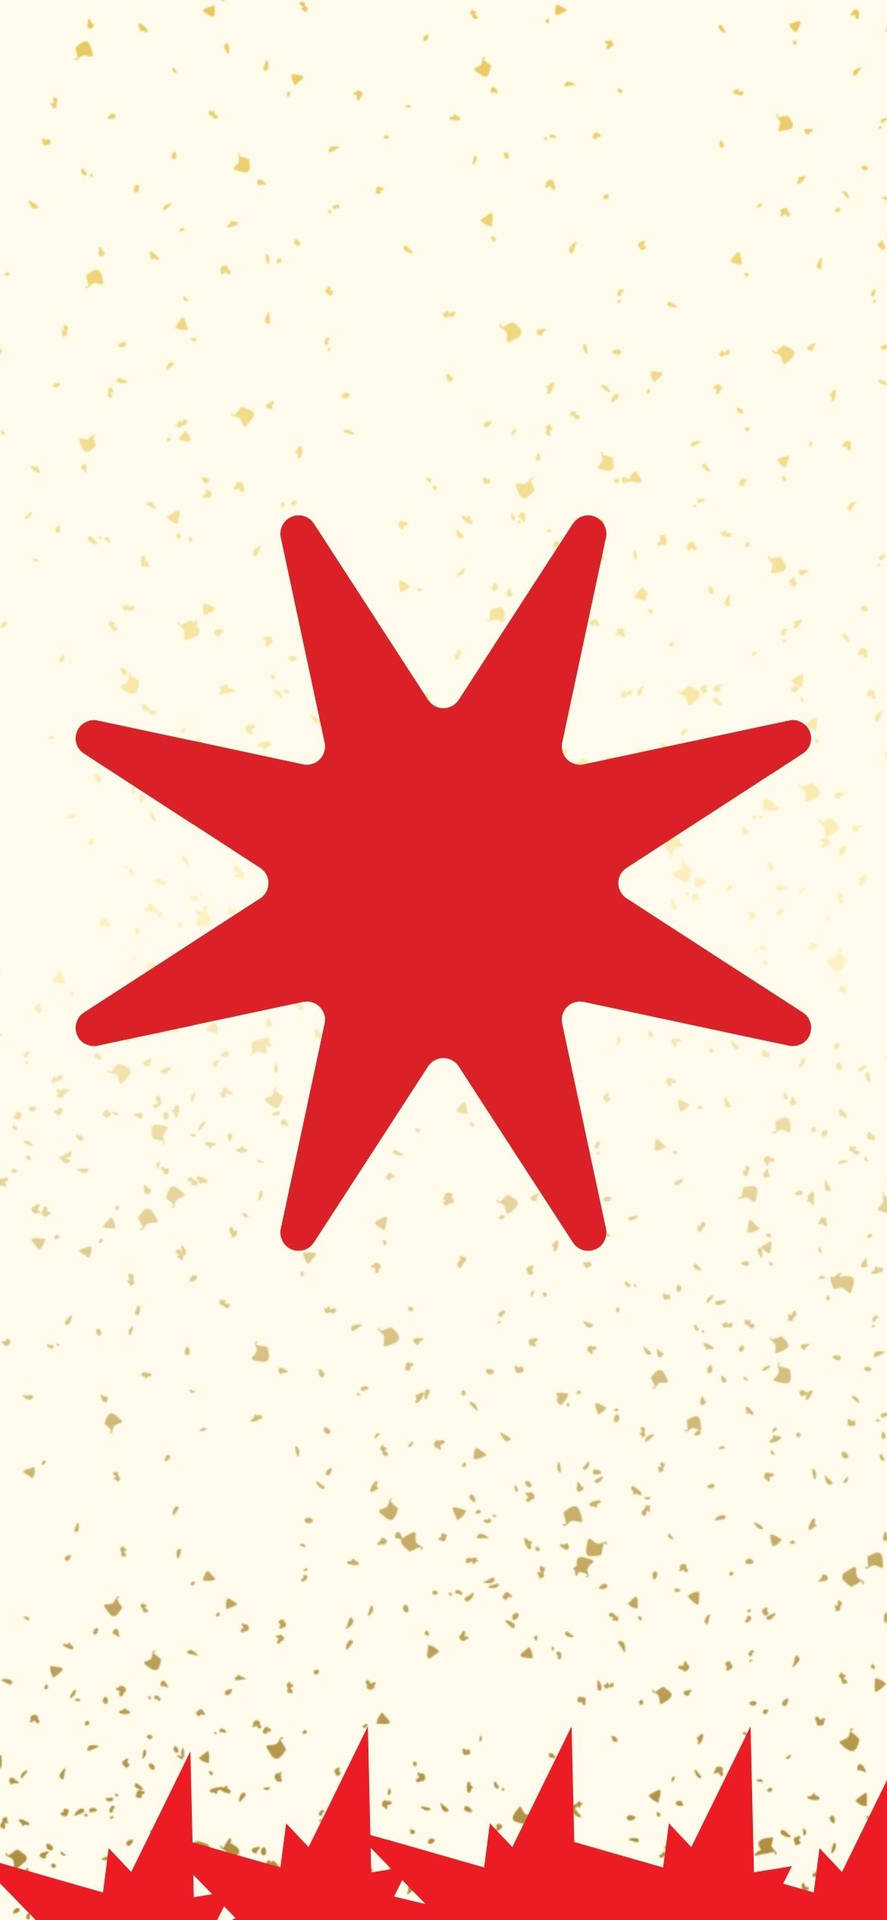 Eight Angled Red Star